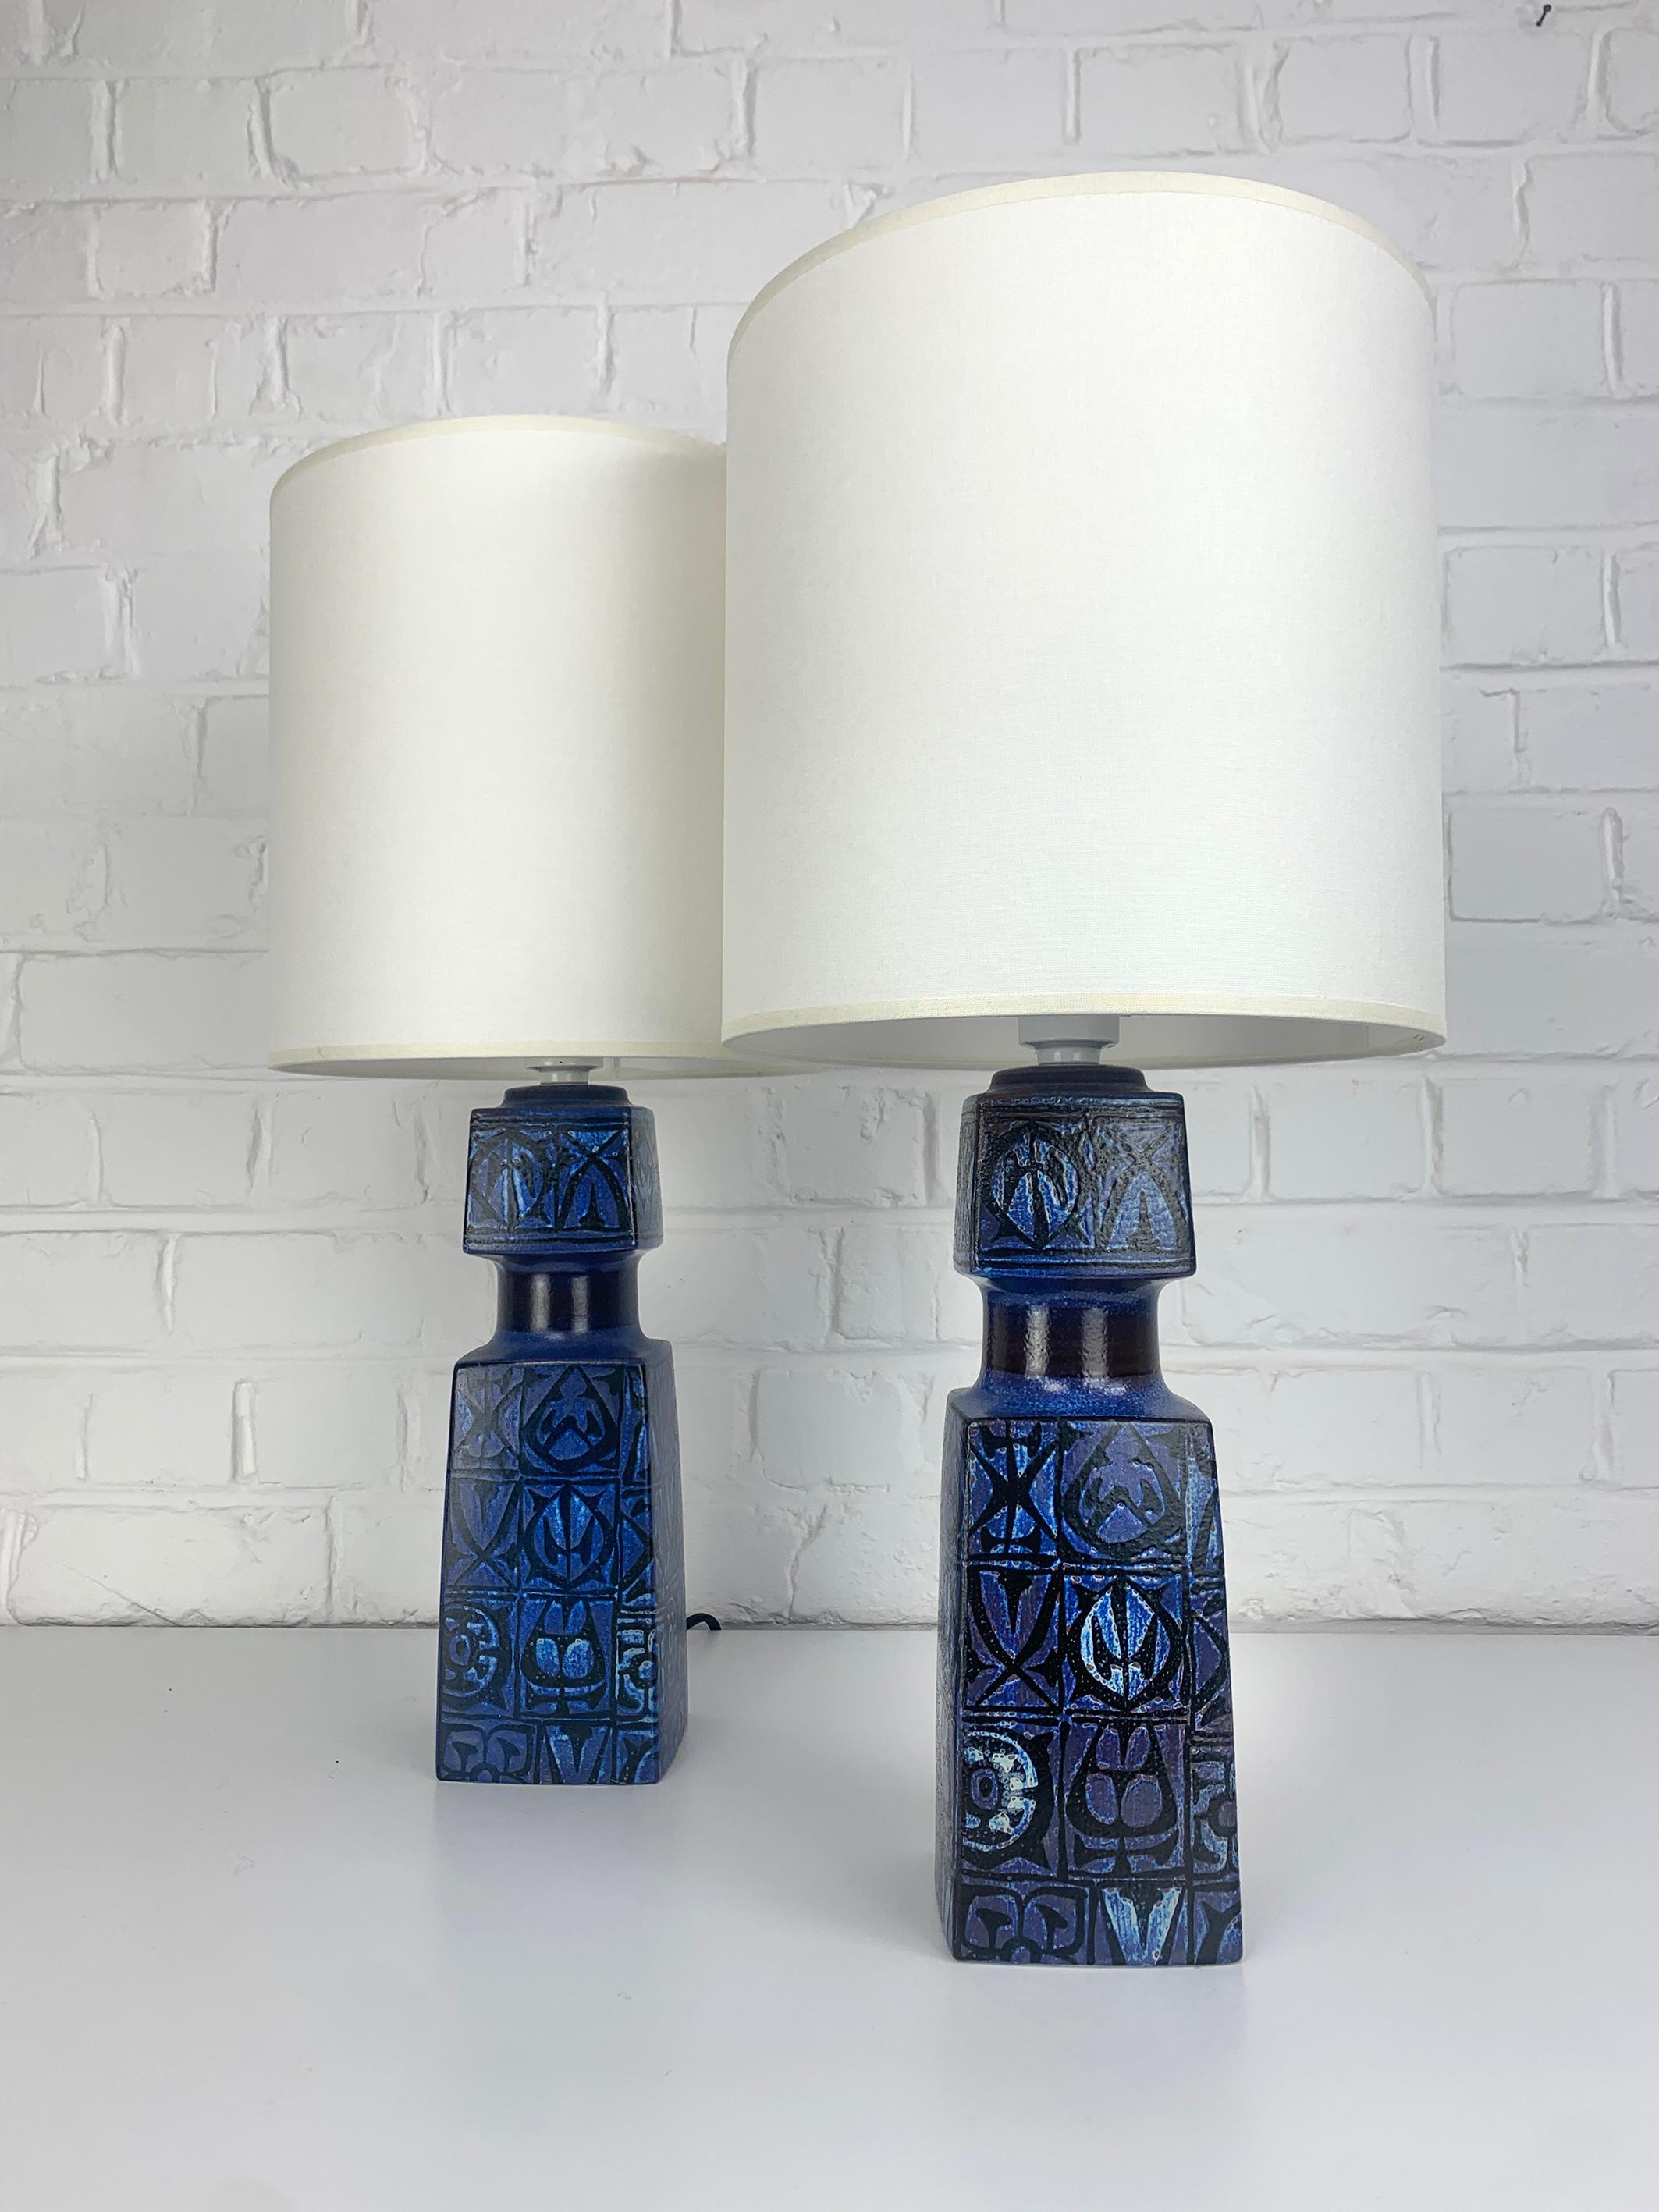 Table lamps created by Nils Thorsson, the Swedish art director of Royal Copenhagen in the 60s. 

They were produced in Denmark by Fog & Morup and distributed by Royal Copenhagen.

The lamps are decorated with abstract patterns created by Nils